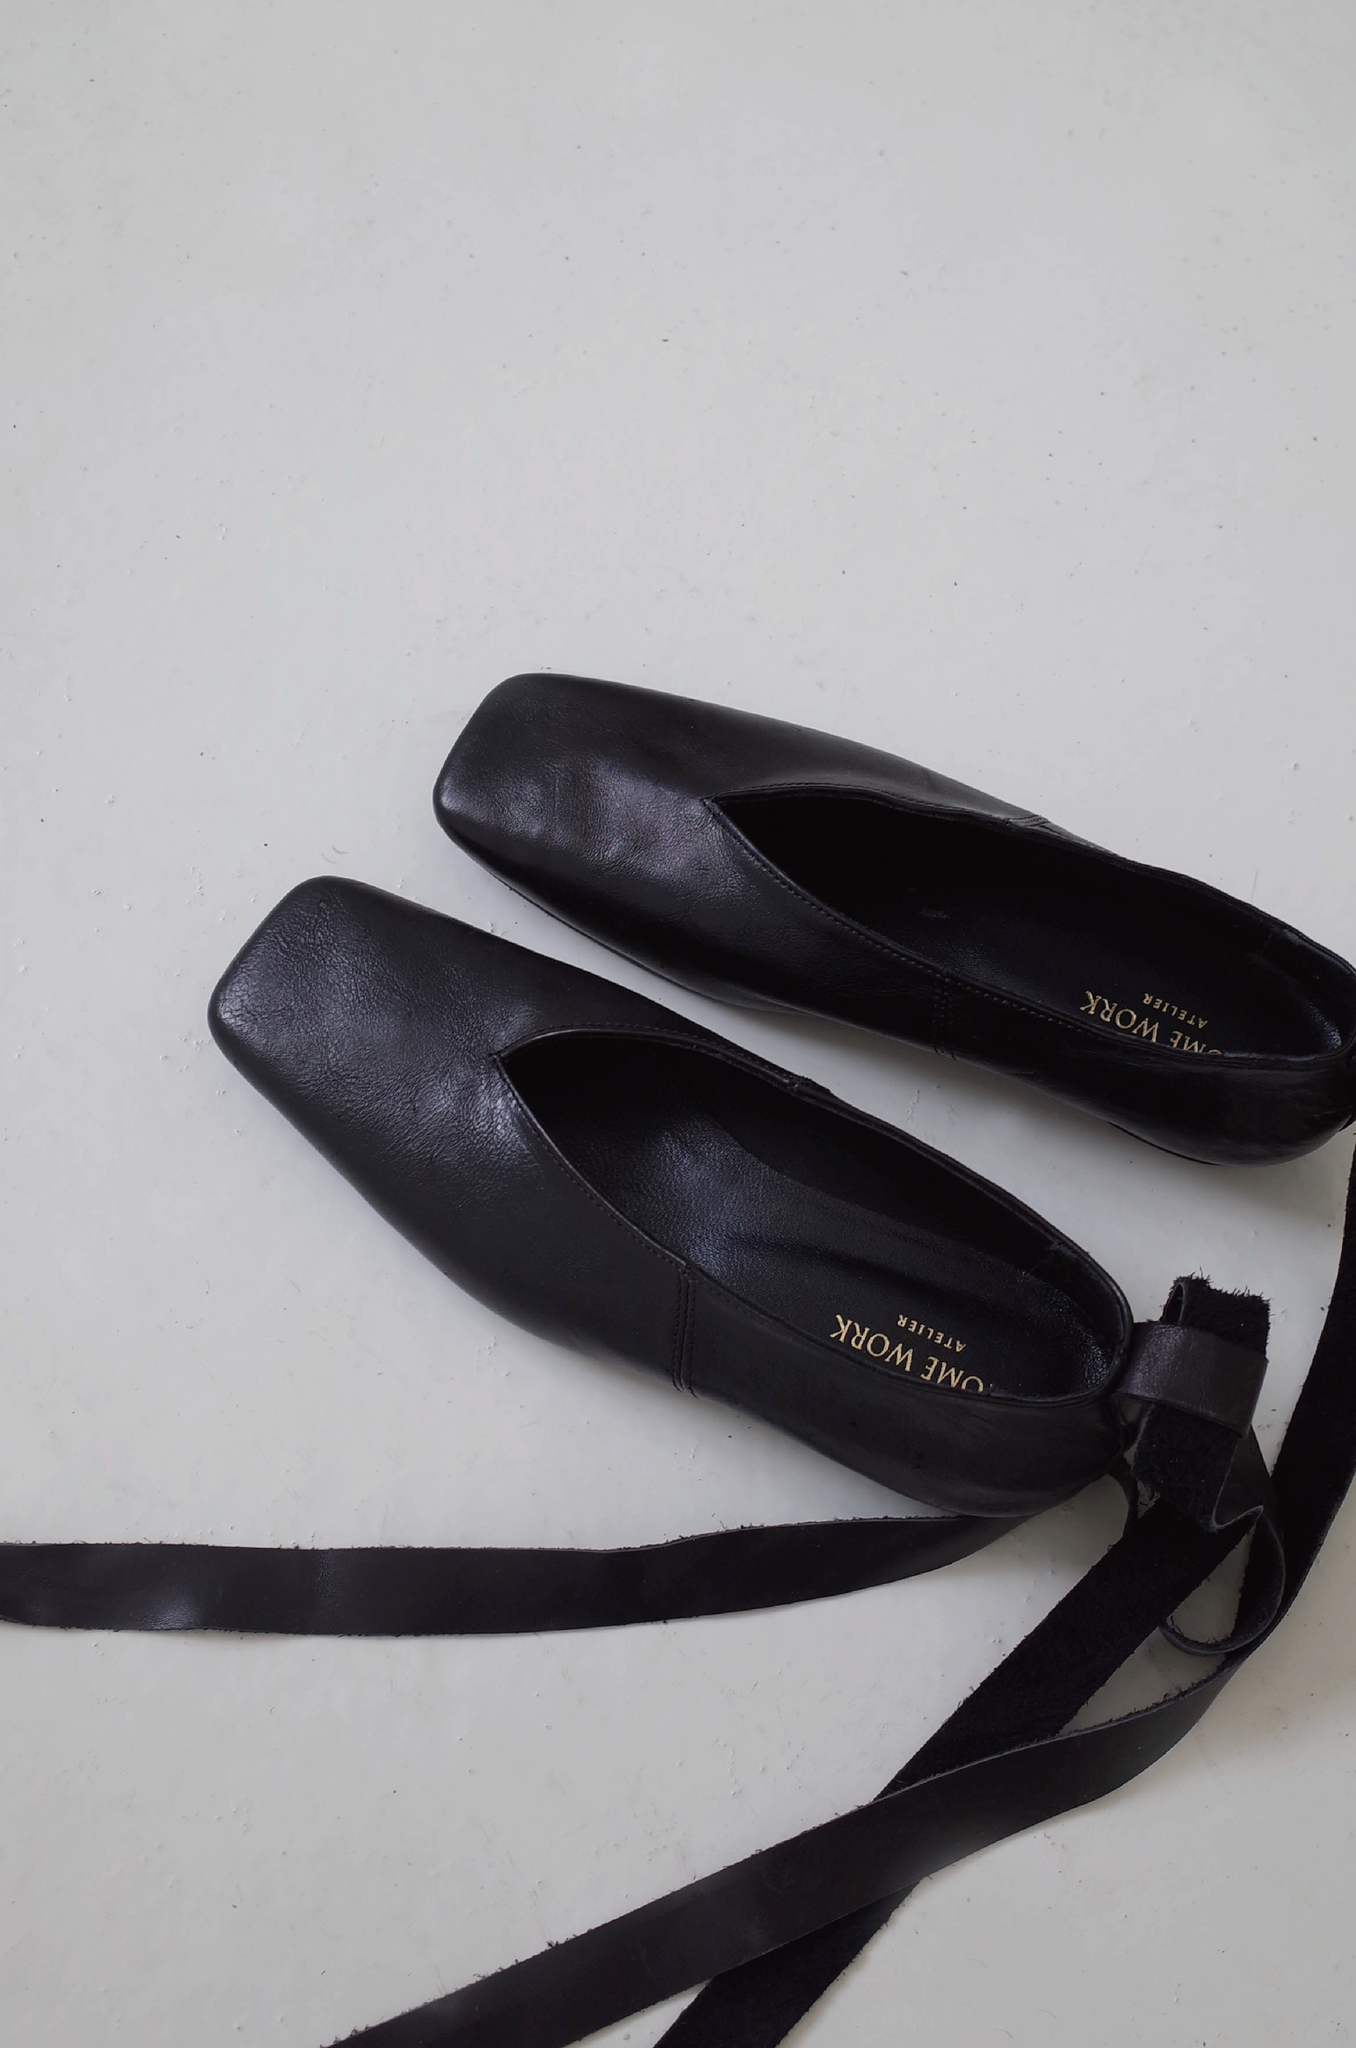 ・ Reserved items ・ Craftsman Made Leather 100% Flats